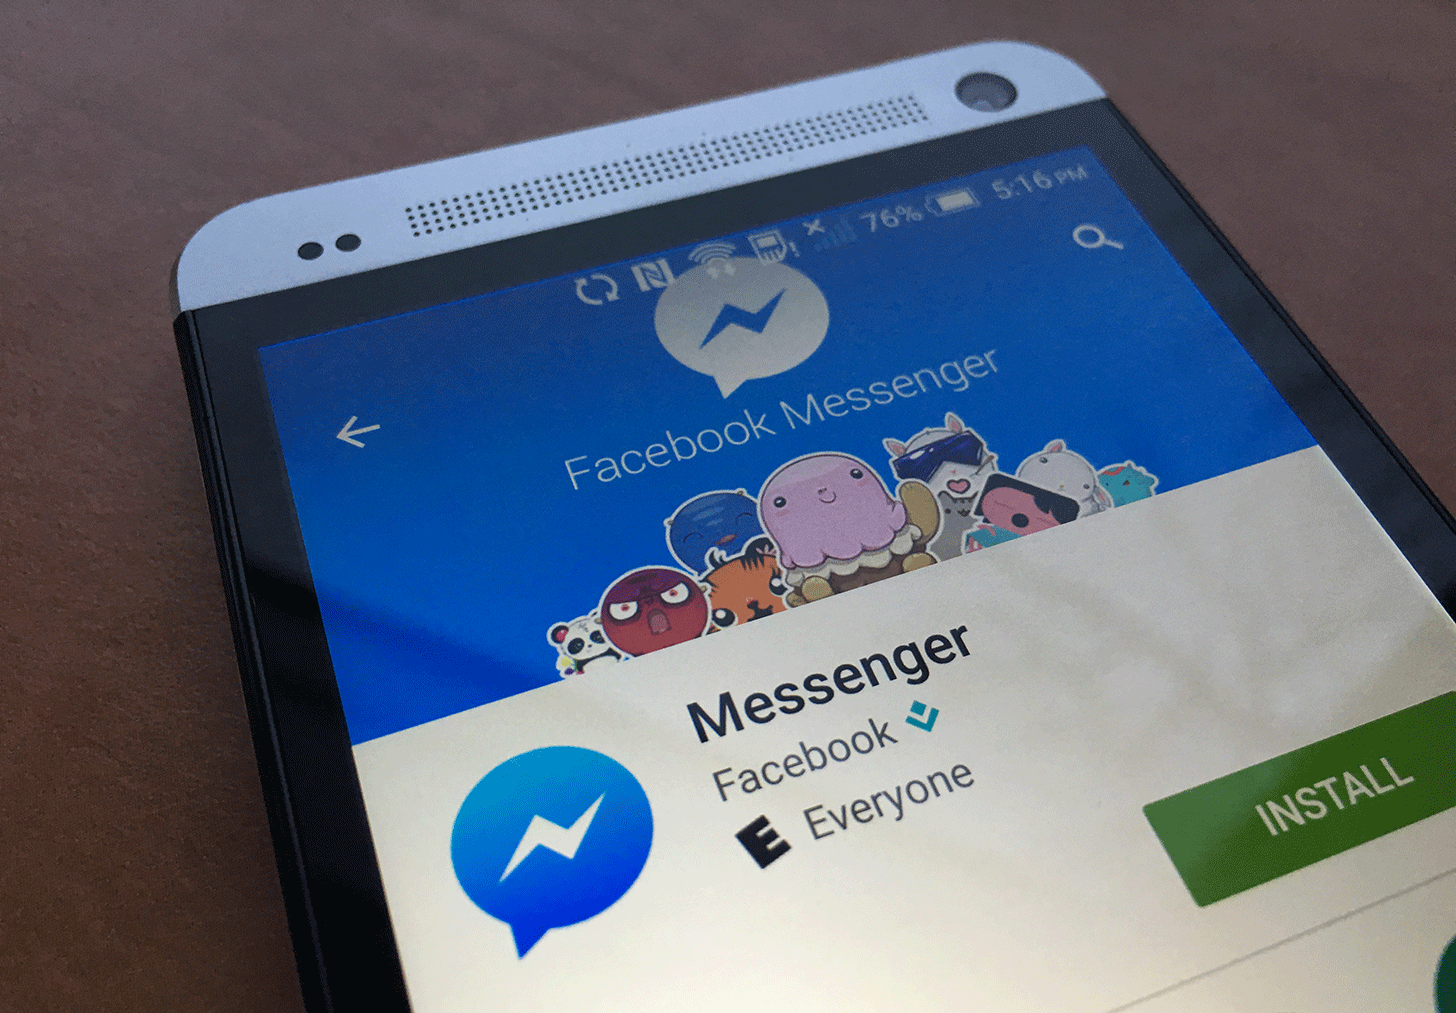 Facebook Messenger testing SMS support on Android.